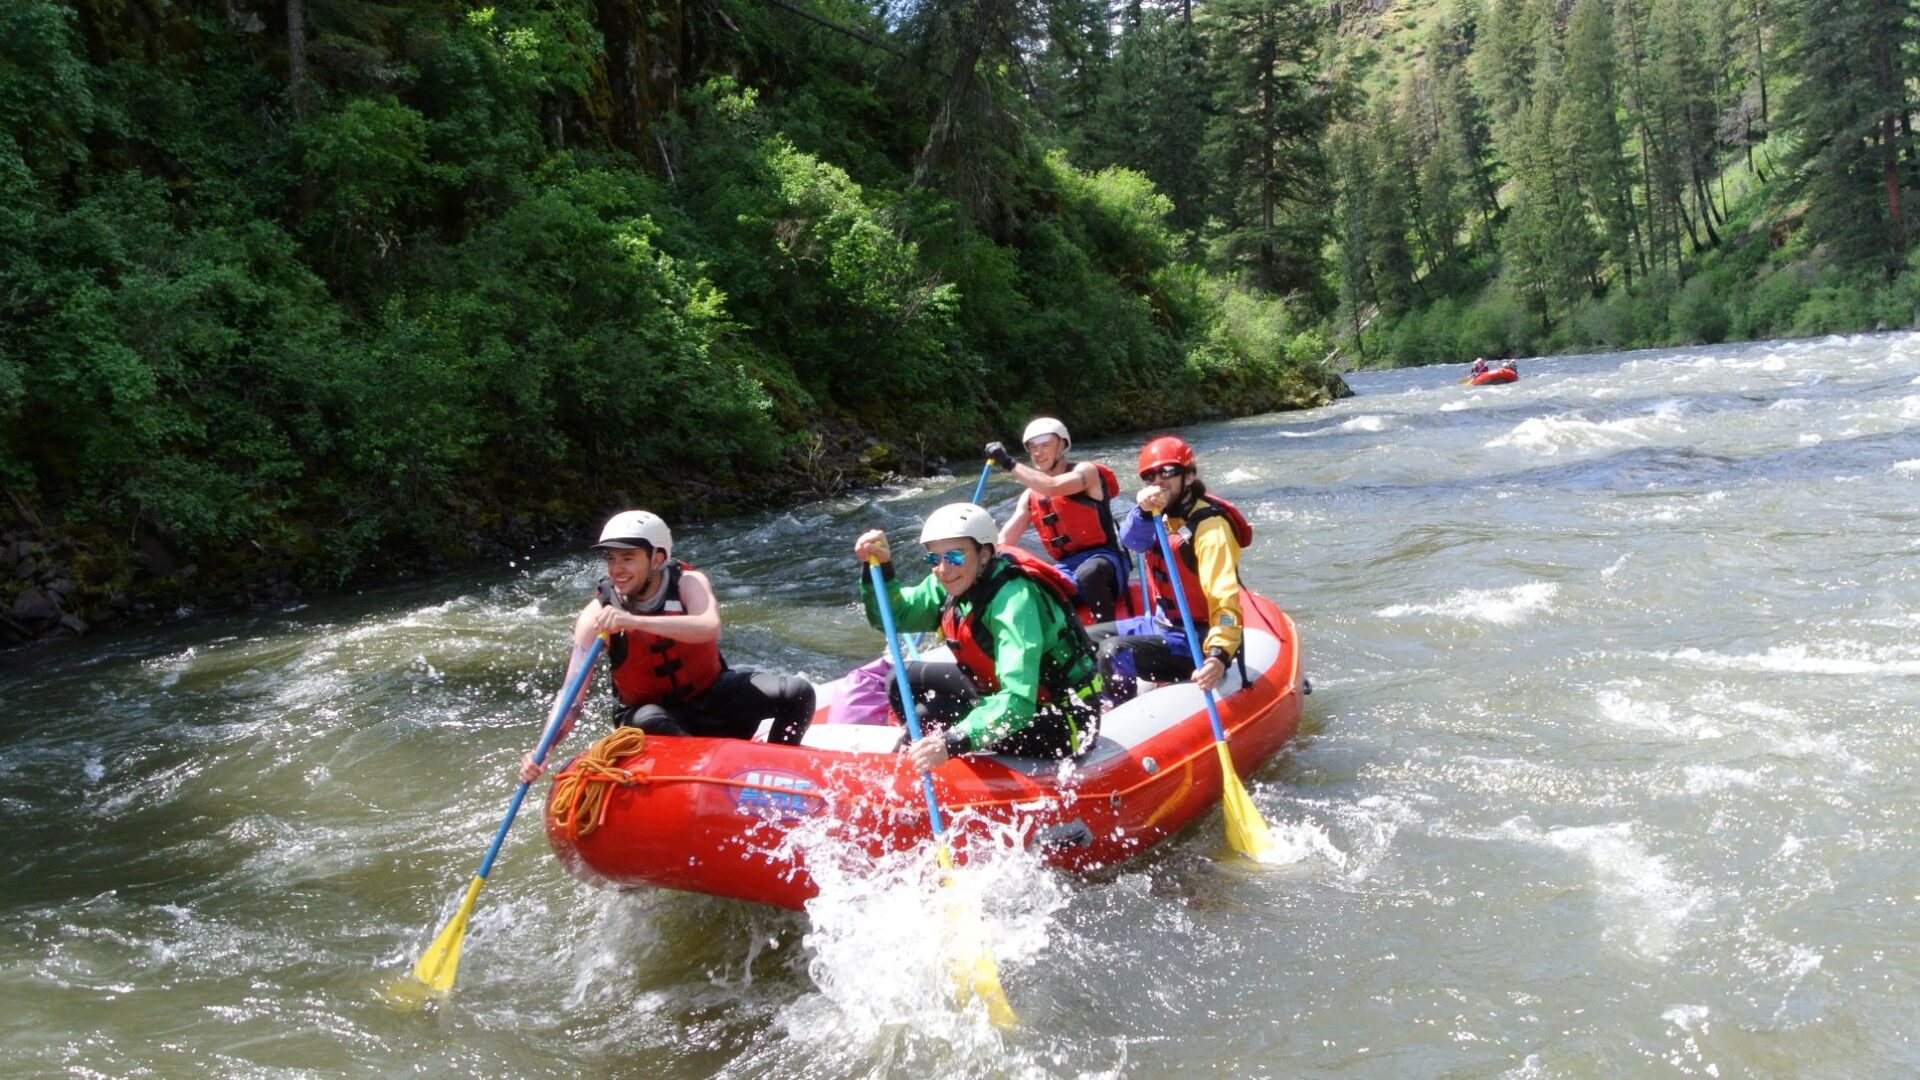 Four college students whitewater rafting on a river.